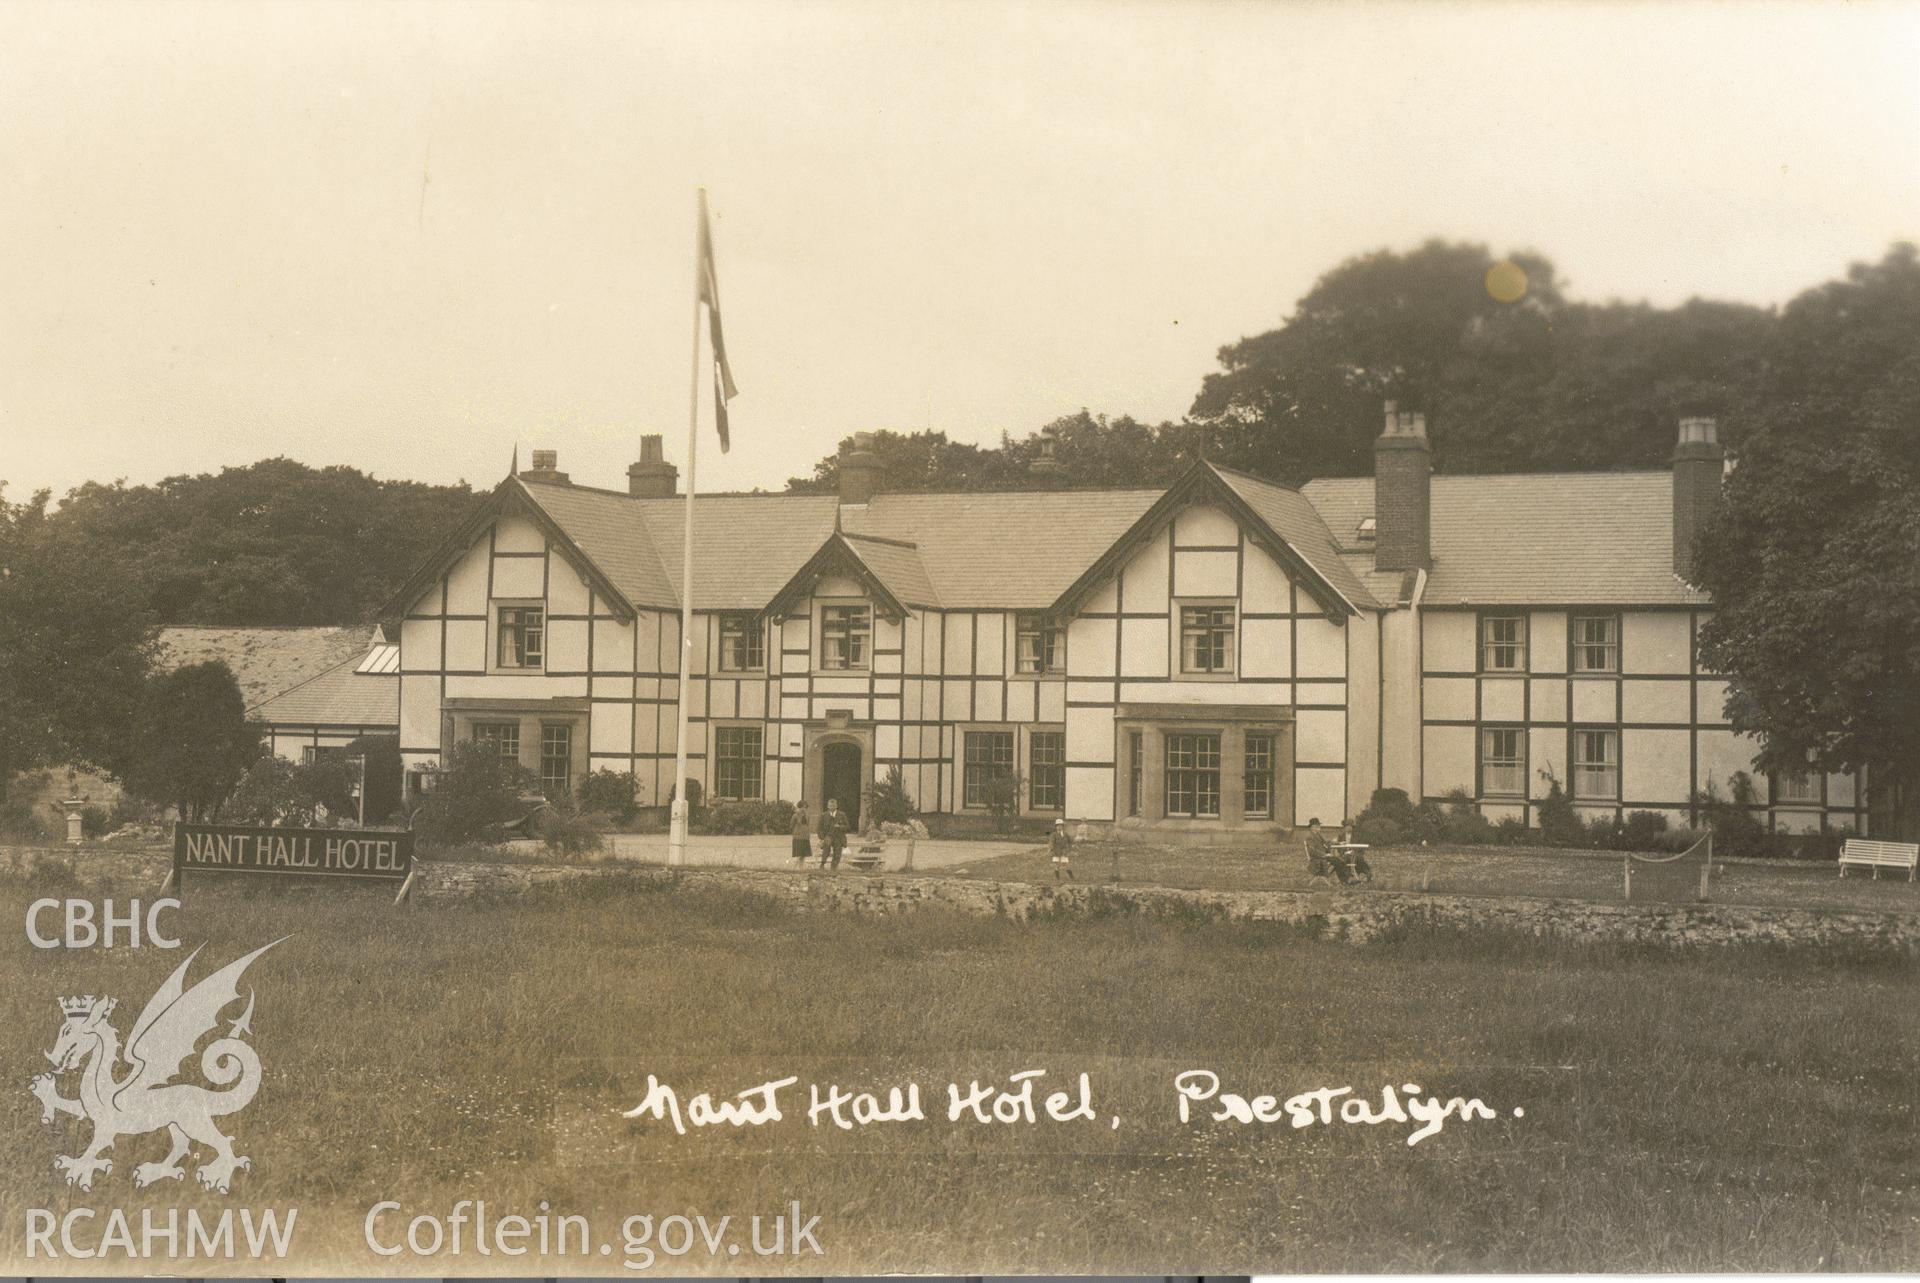 Digitised postcard image of Nant Hall Hotel, Prestatyn, Lewis the Art Studio, Prestatyn. Produced by Parks and Gardens Data Services, from an original item in the Peter Davis Collection at Parks and Gardens UK. We hold only web-resolution images of this collection, suitable for viewing on screen and for research purposes only. We do not hold the original images, or publication quality scans.